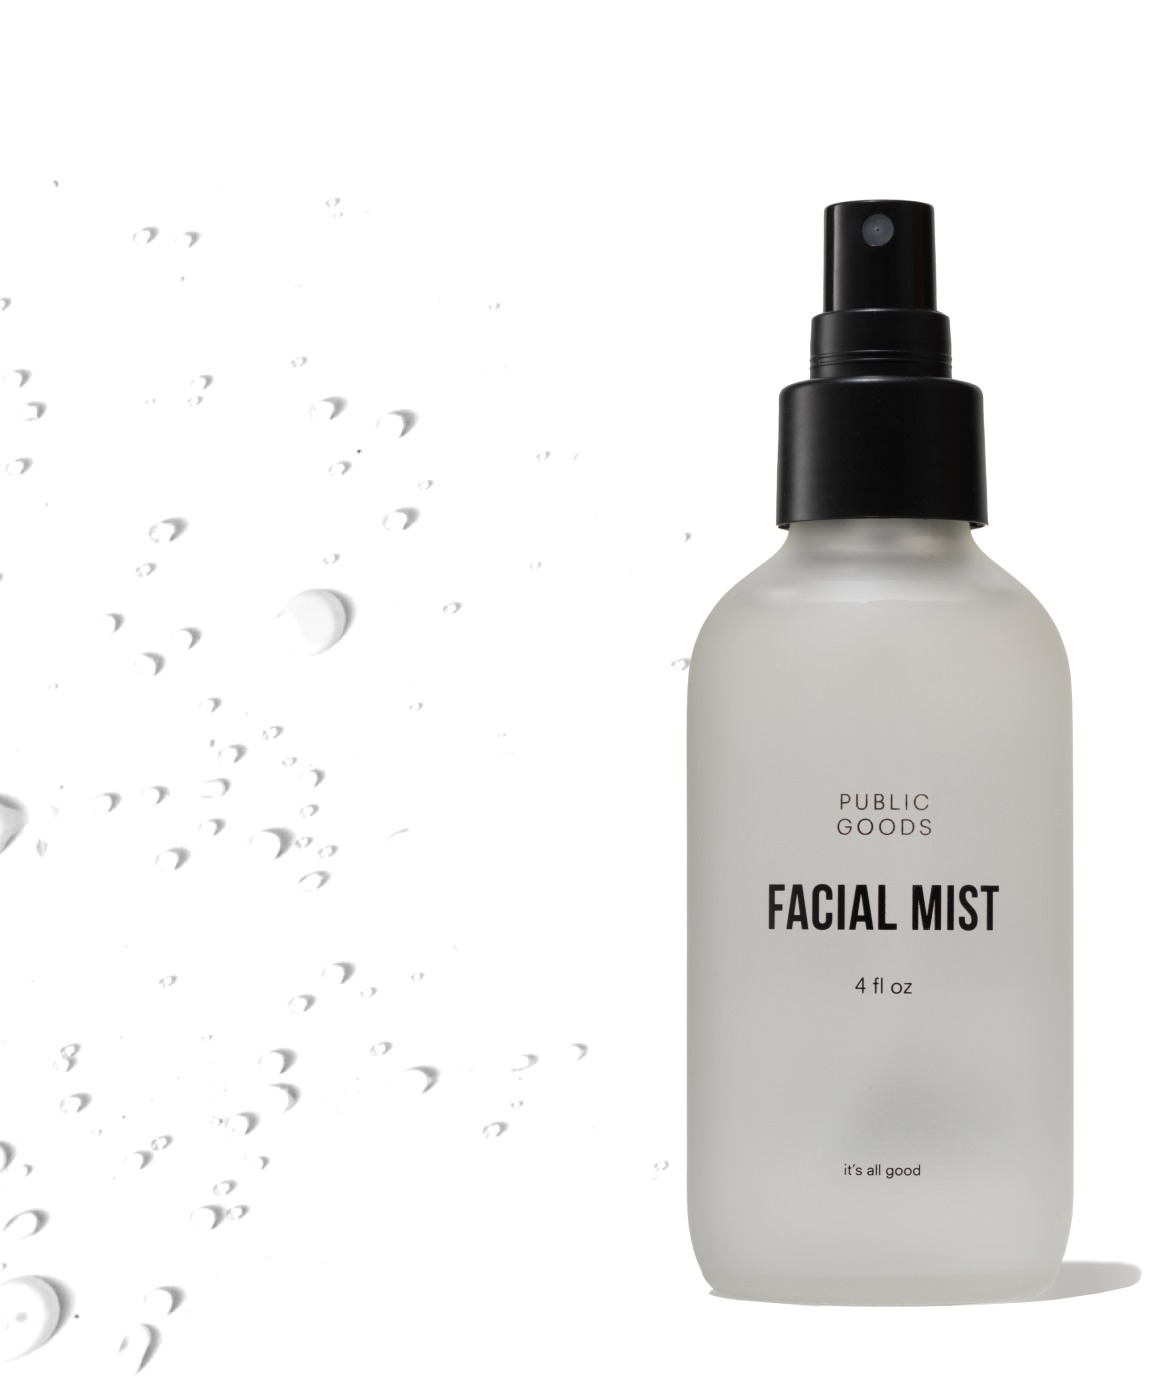 Facial mist Product Image